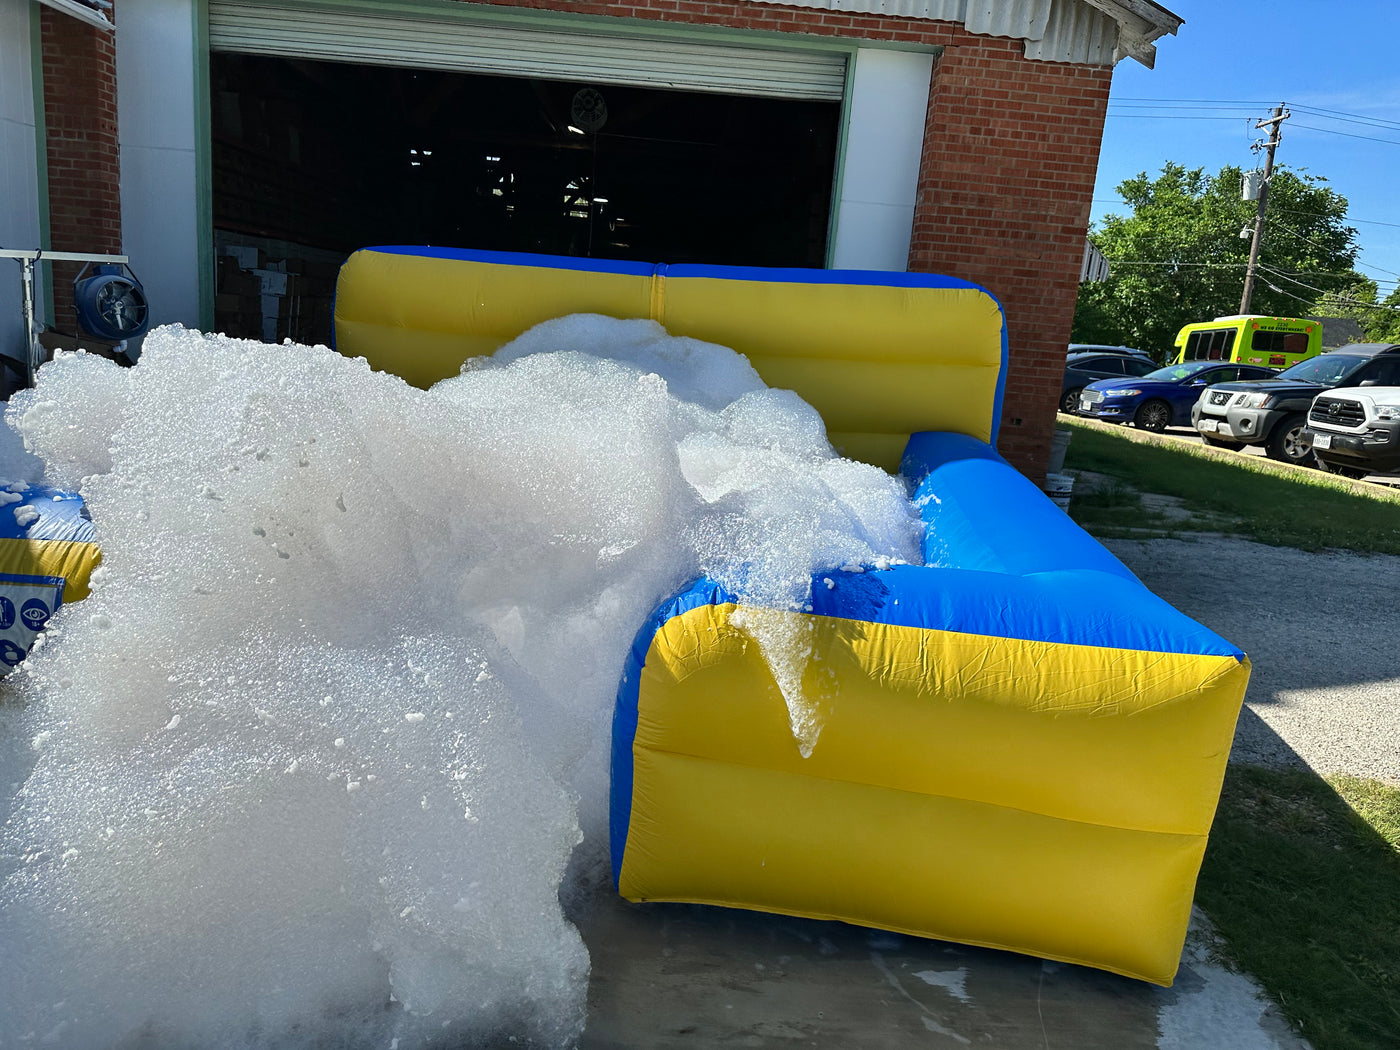 Foam Pit that requires no foam fan or stand. Your blower creates the foam with this foam pit.